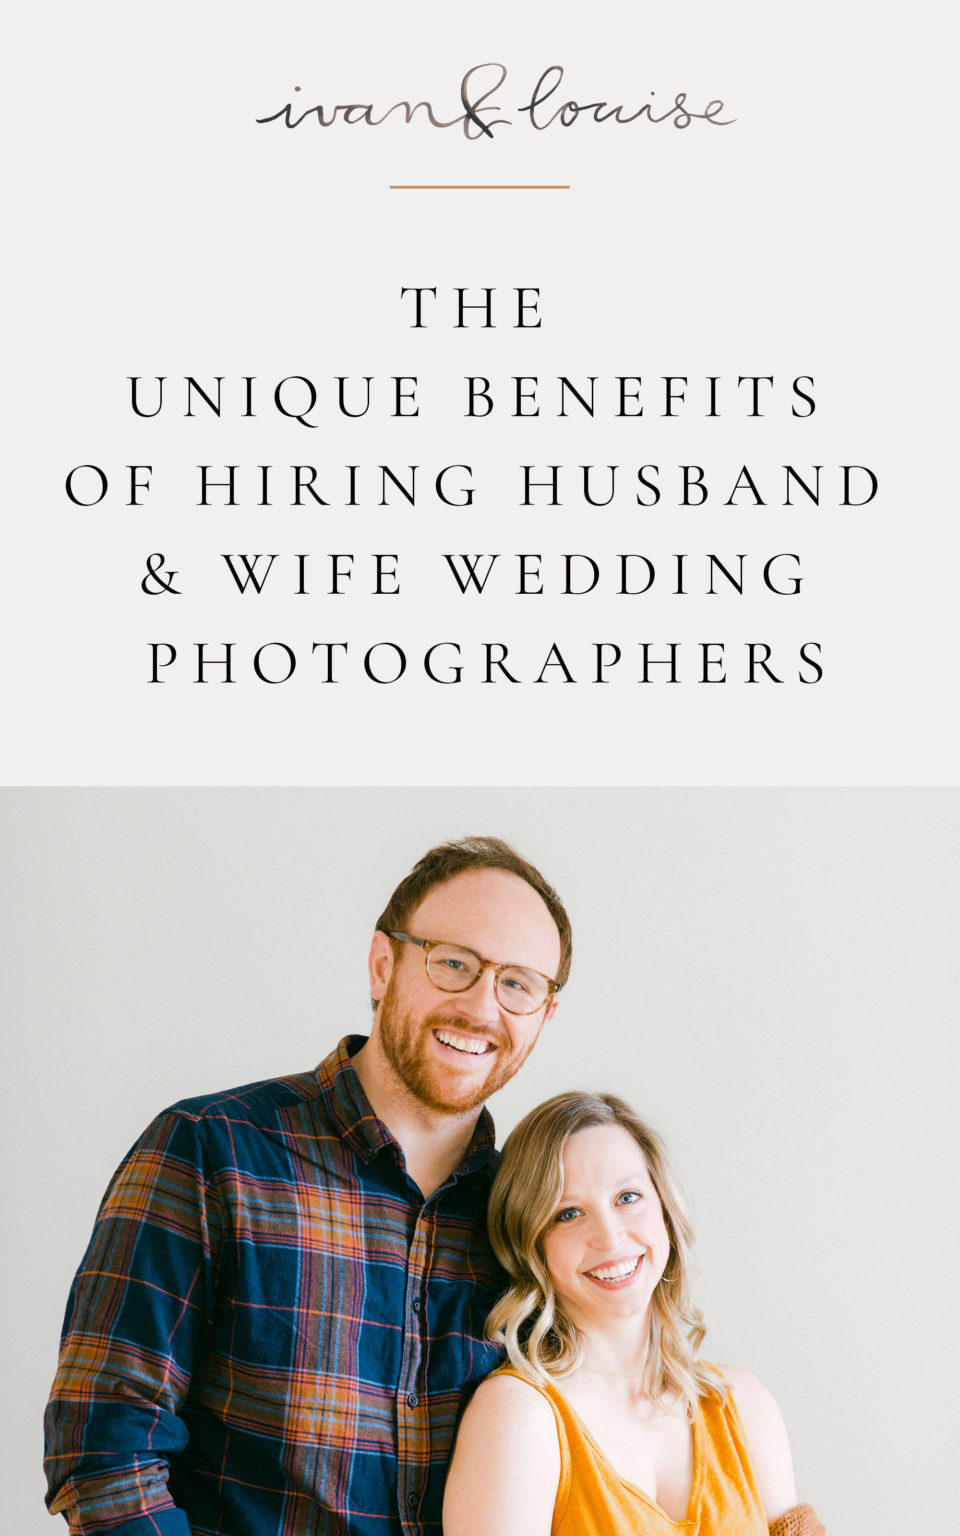 The Unique Benefits of Hiring Husband & Wife Wedding Photographers | How to Choose Your Wedding Photographer